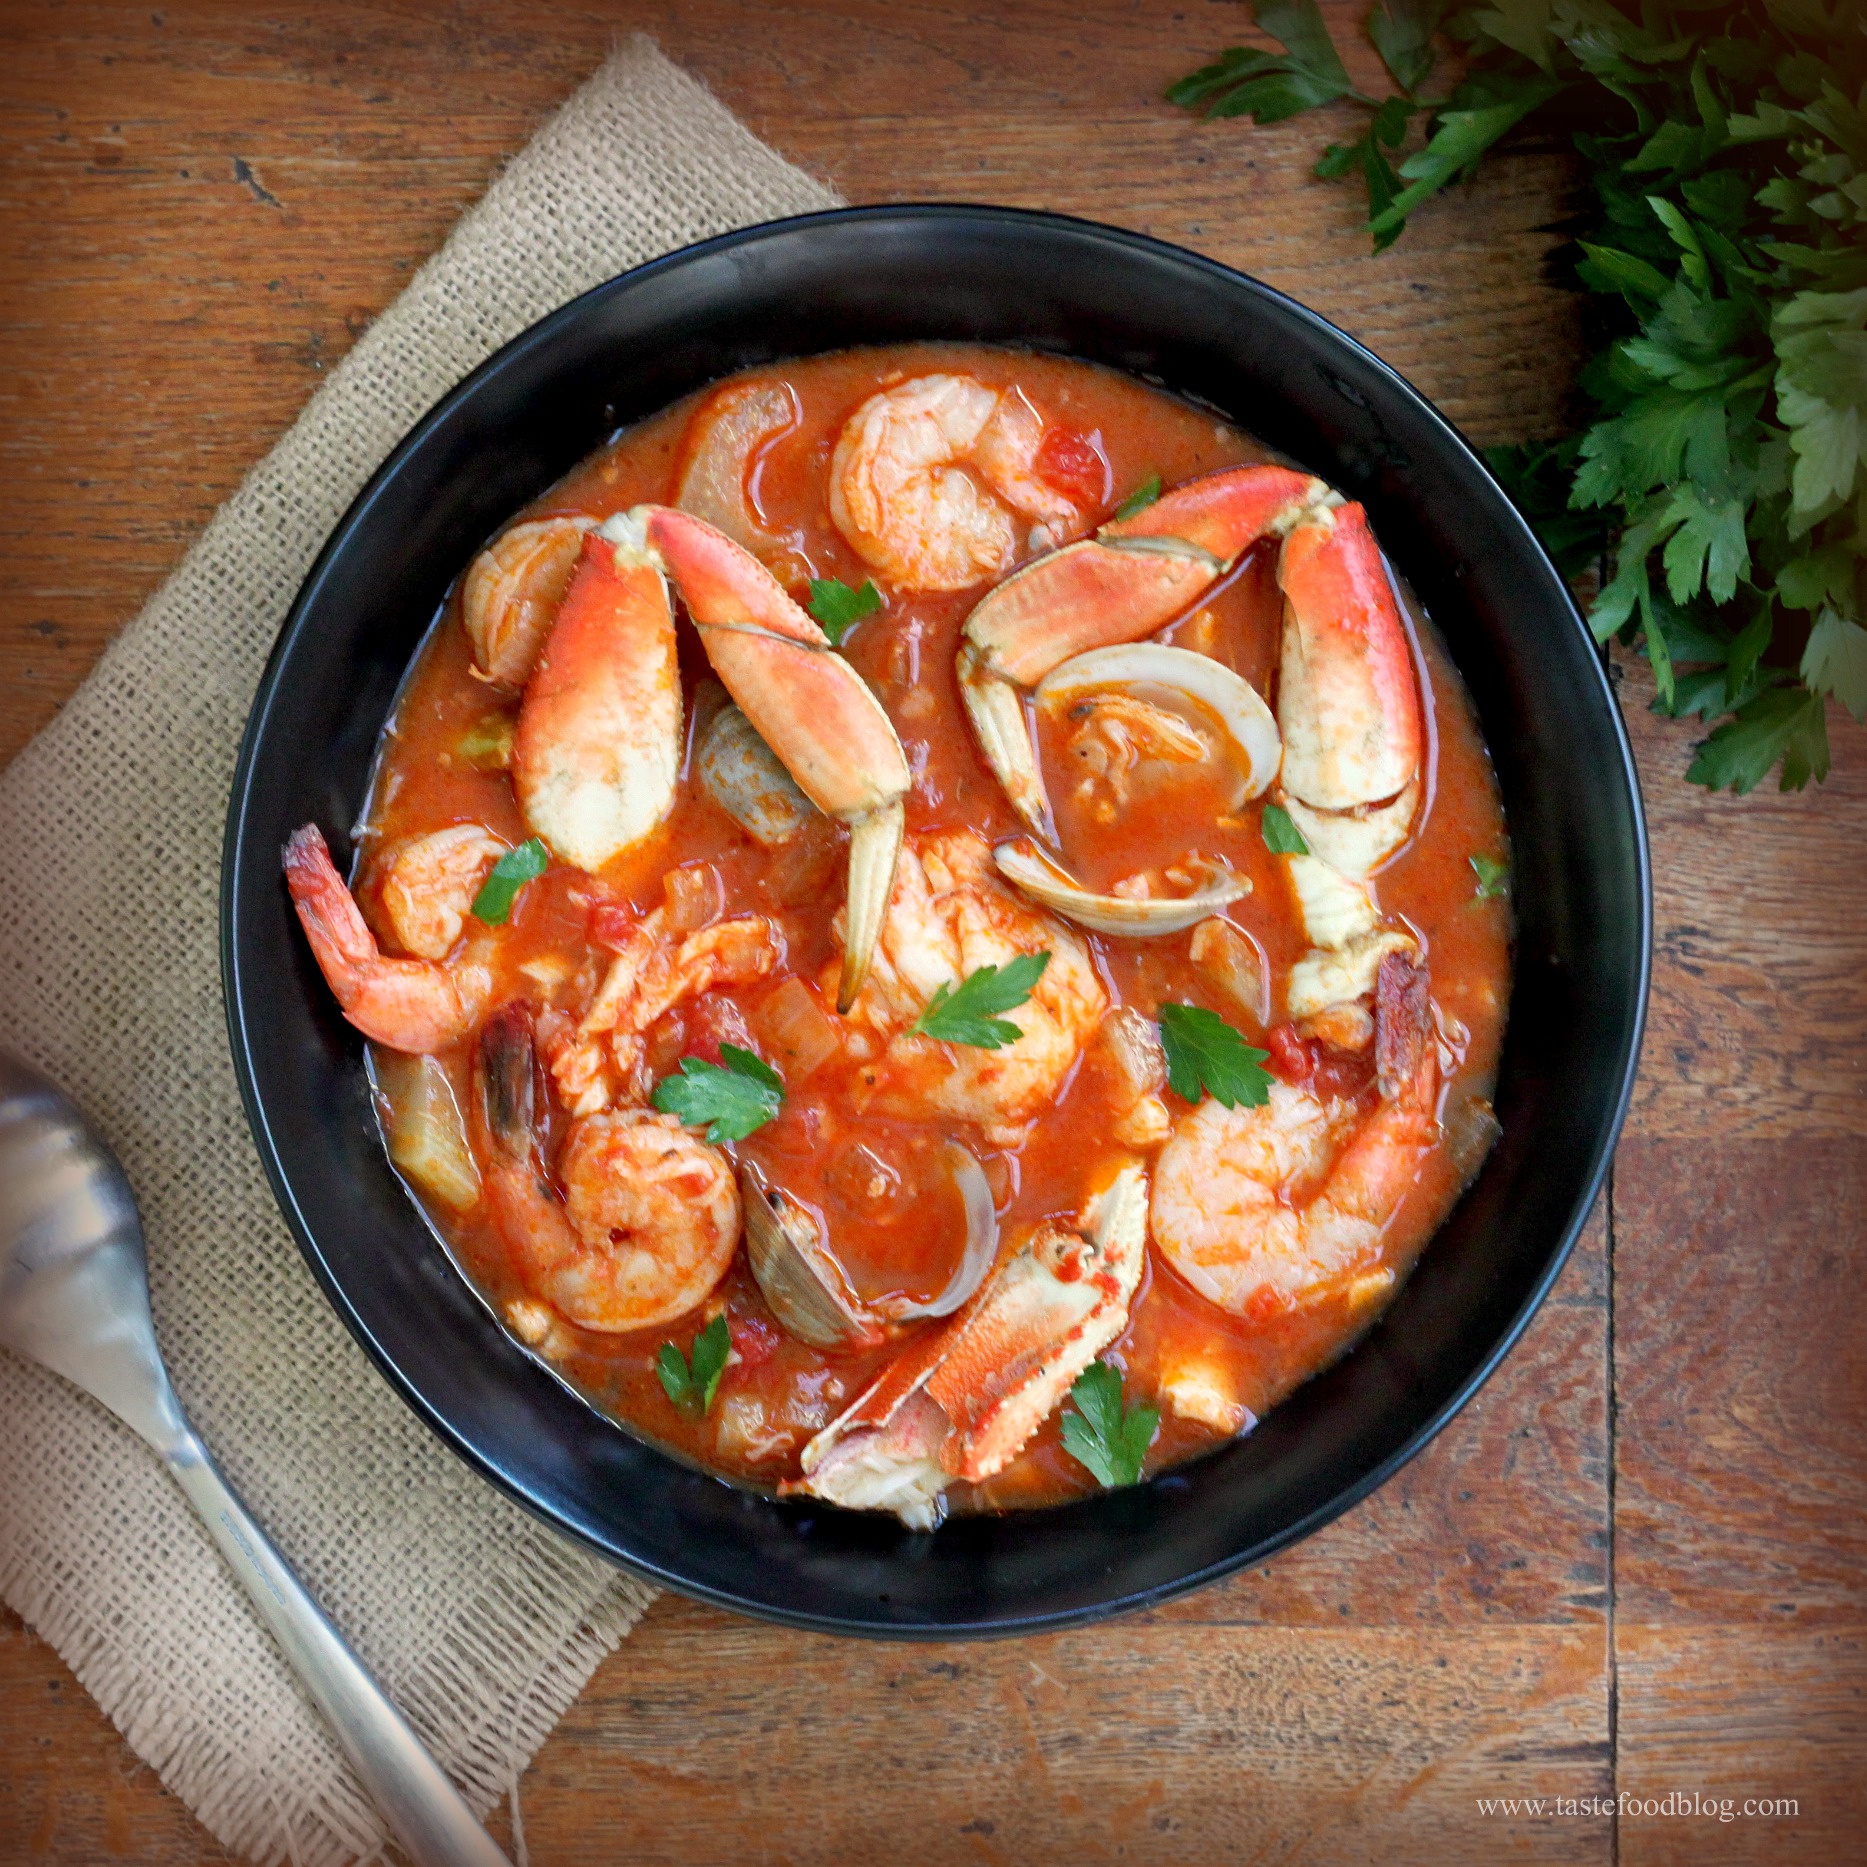 Make This Delicious Cioppino Stew For Tonight's Dinner! crab fish white sea shells shrimp spices herbs easy1